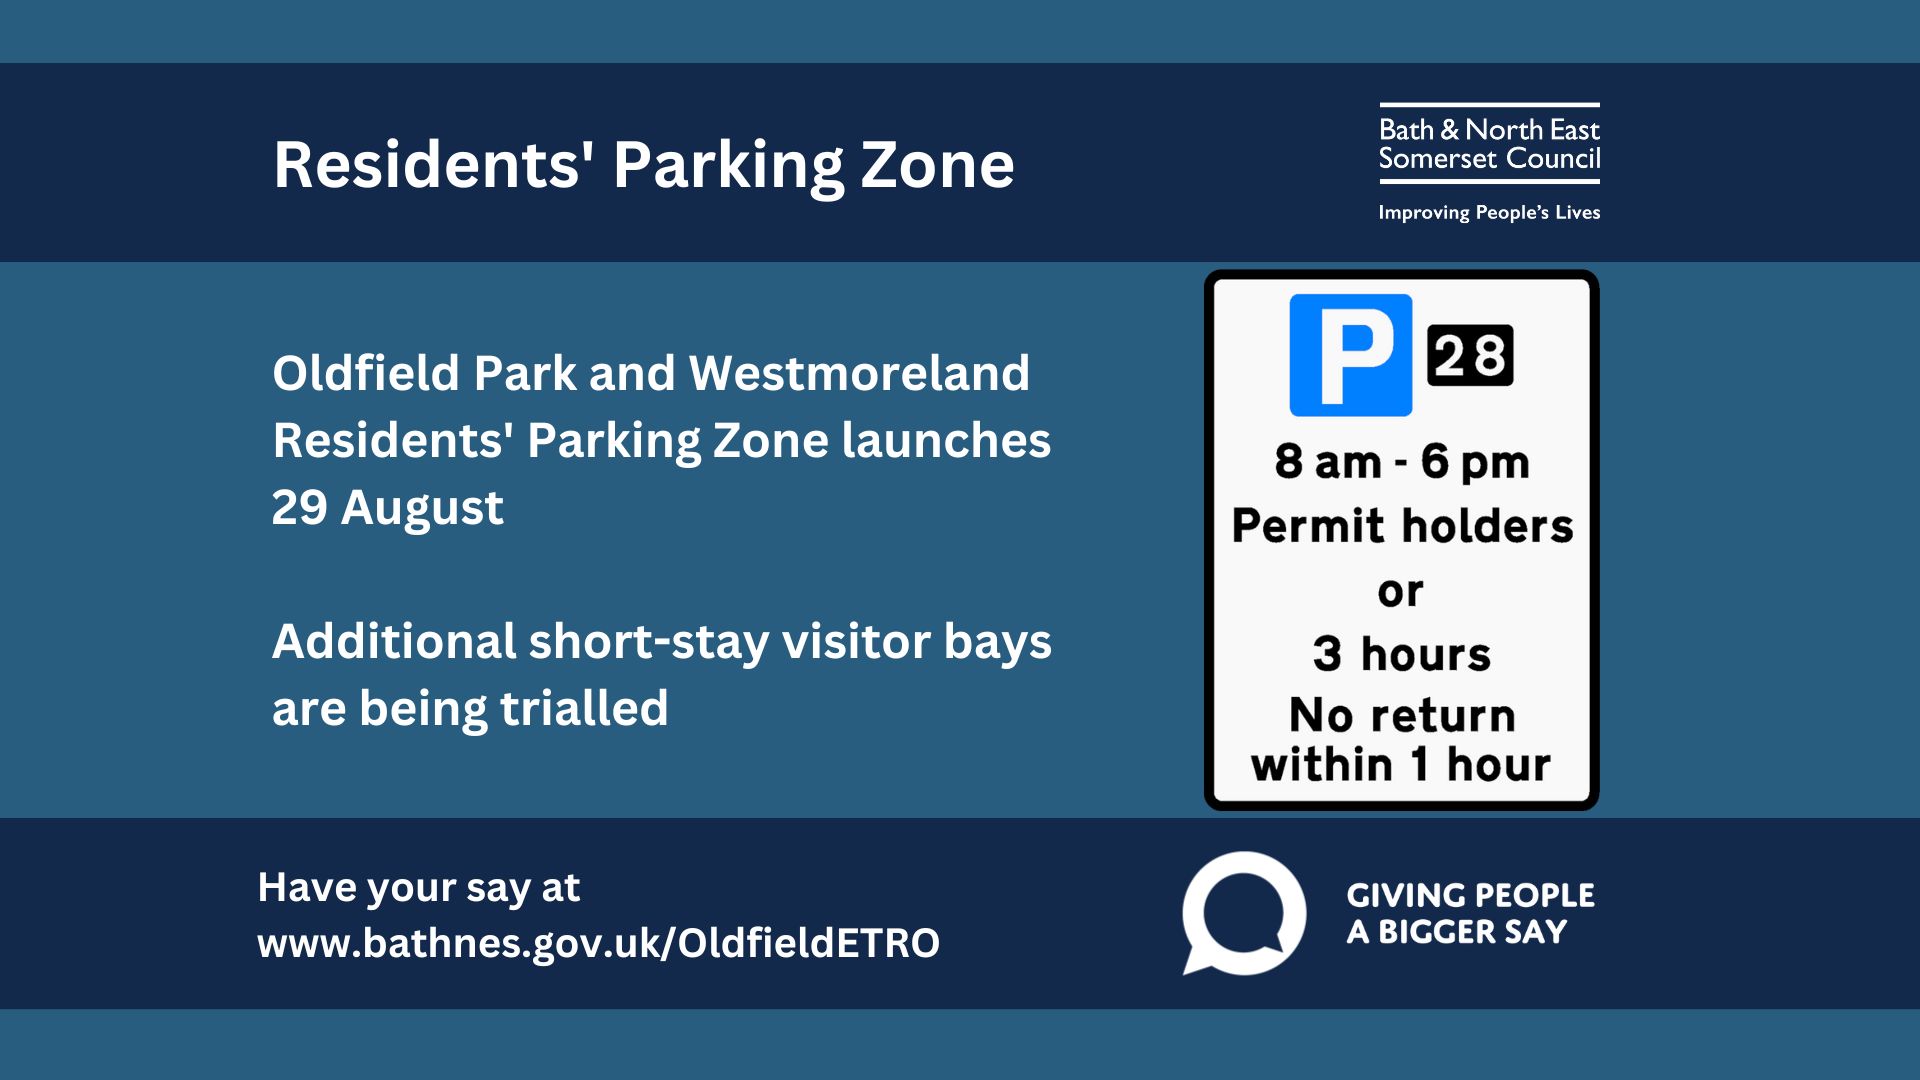 Residents' Parking Zone sign for Oldfield Park